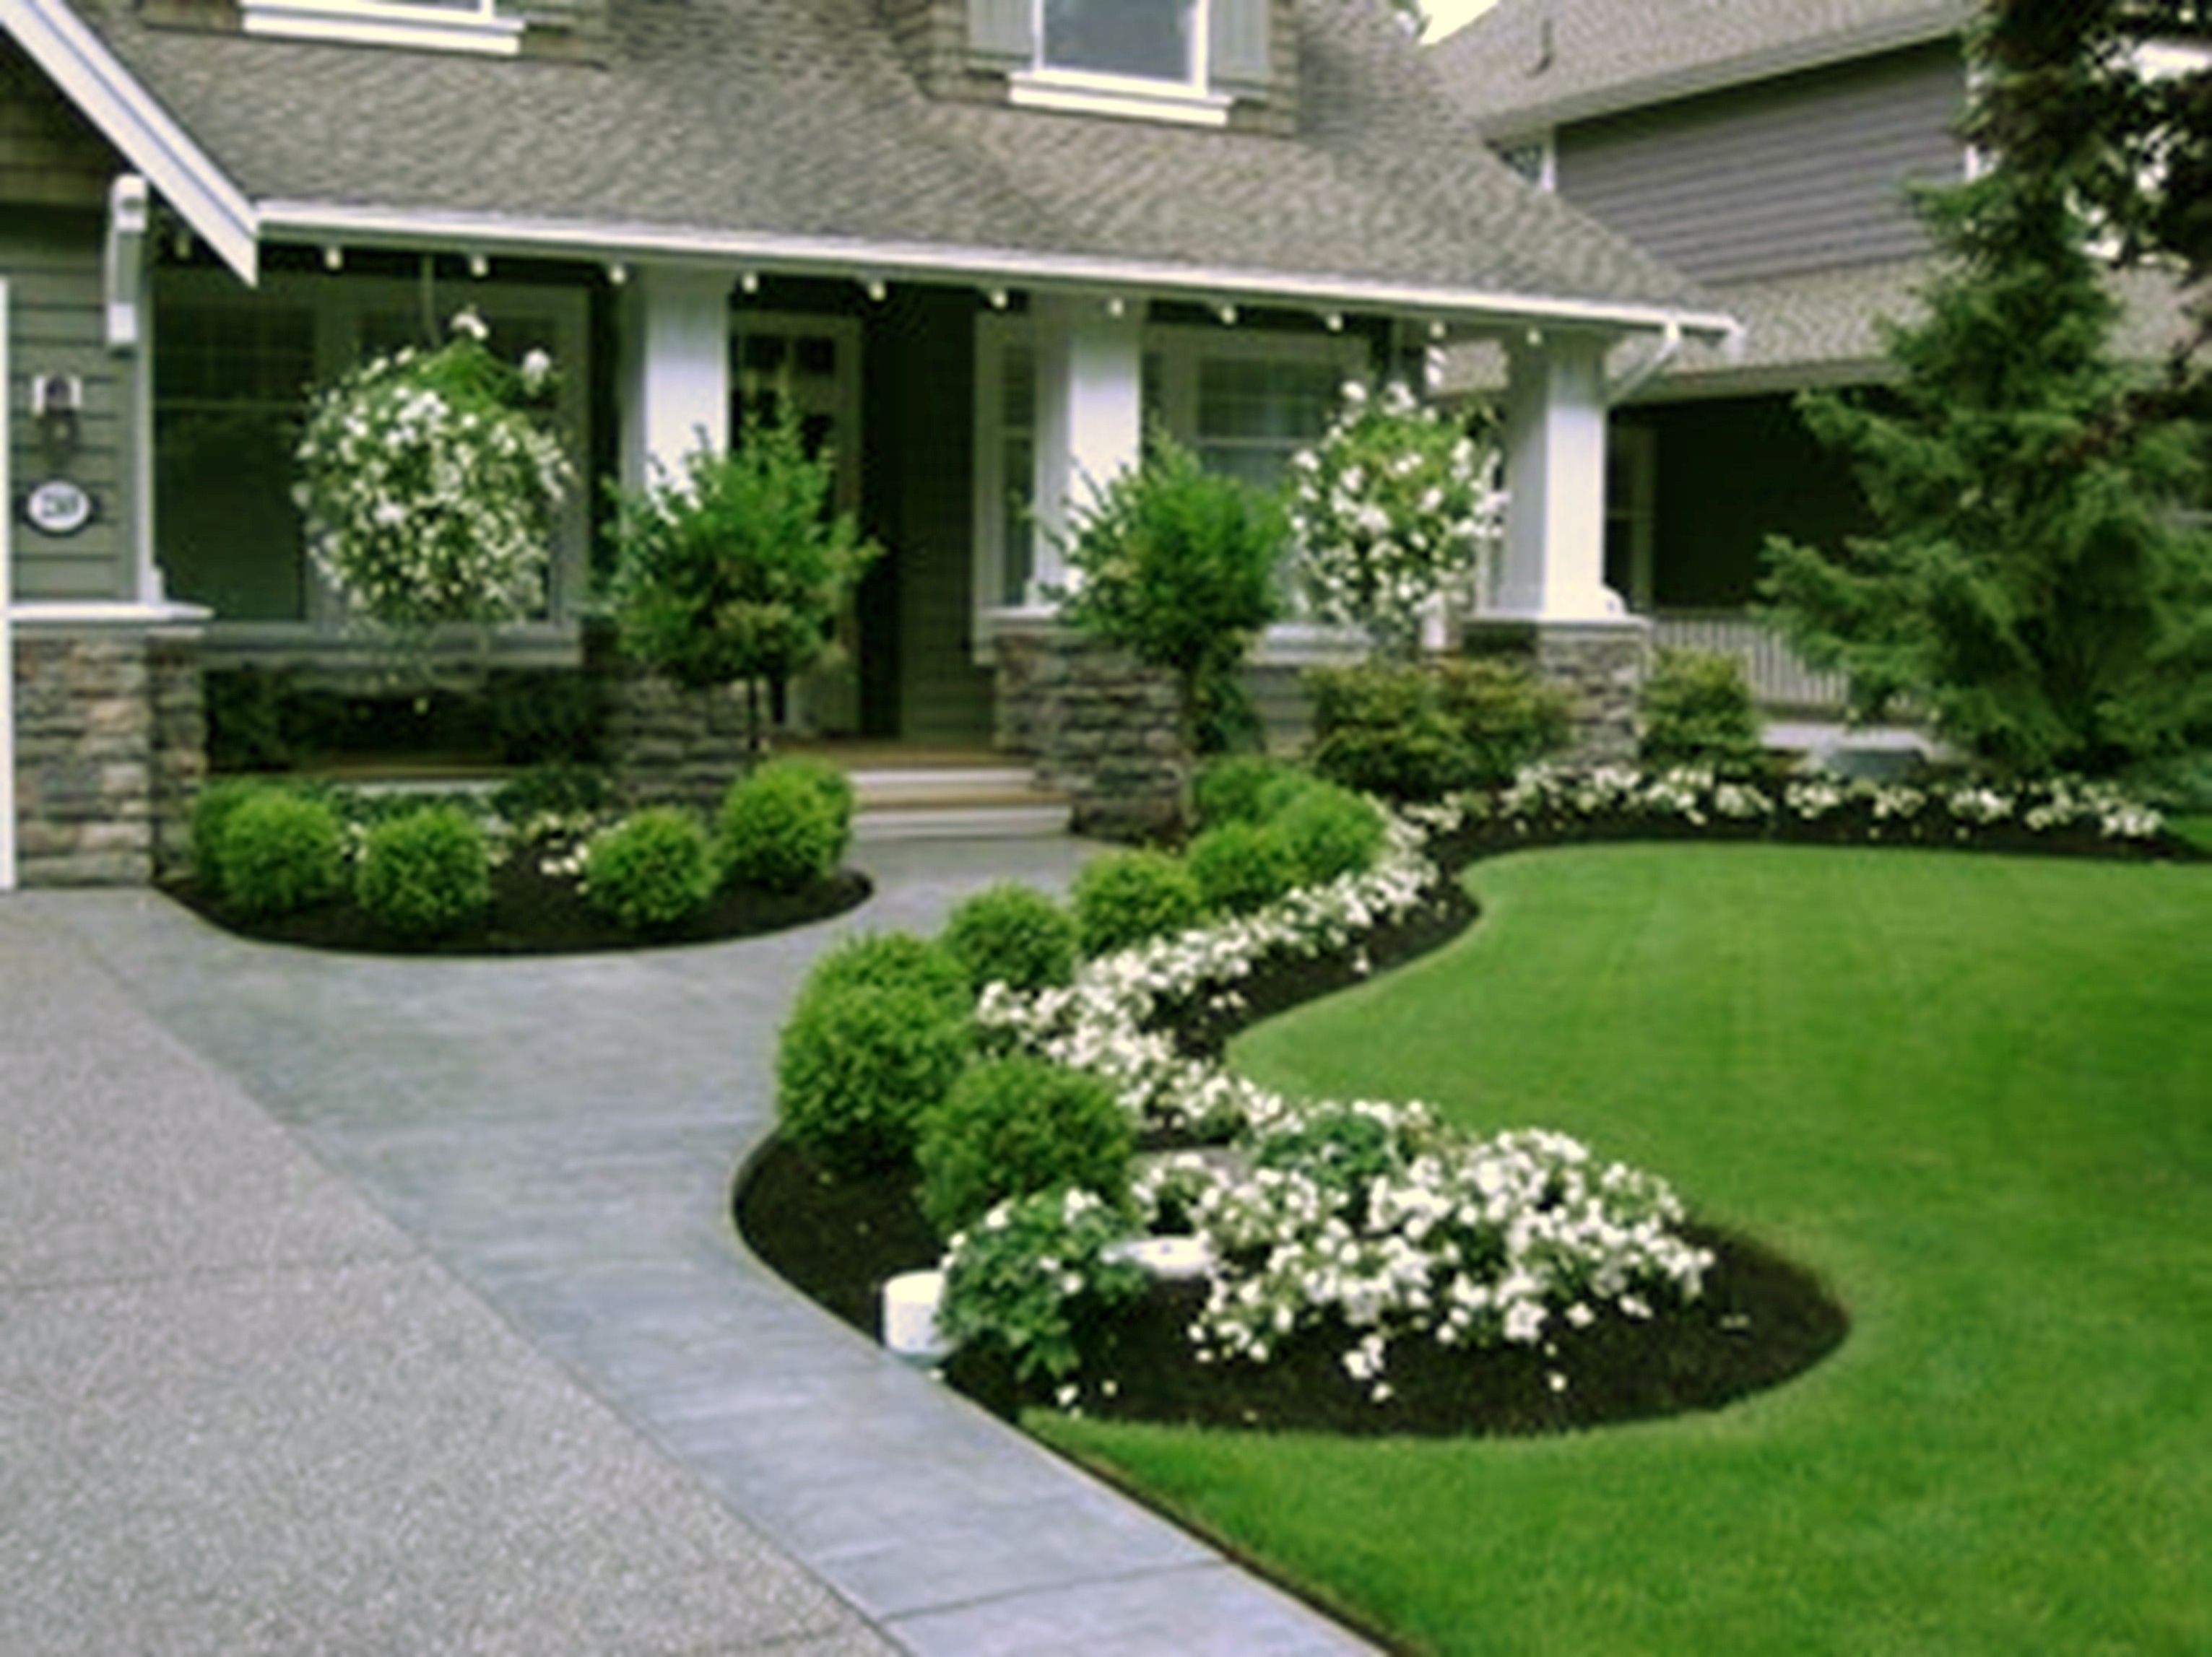 Simple And Stylish Entry Walkway Landscaping